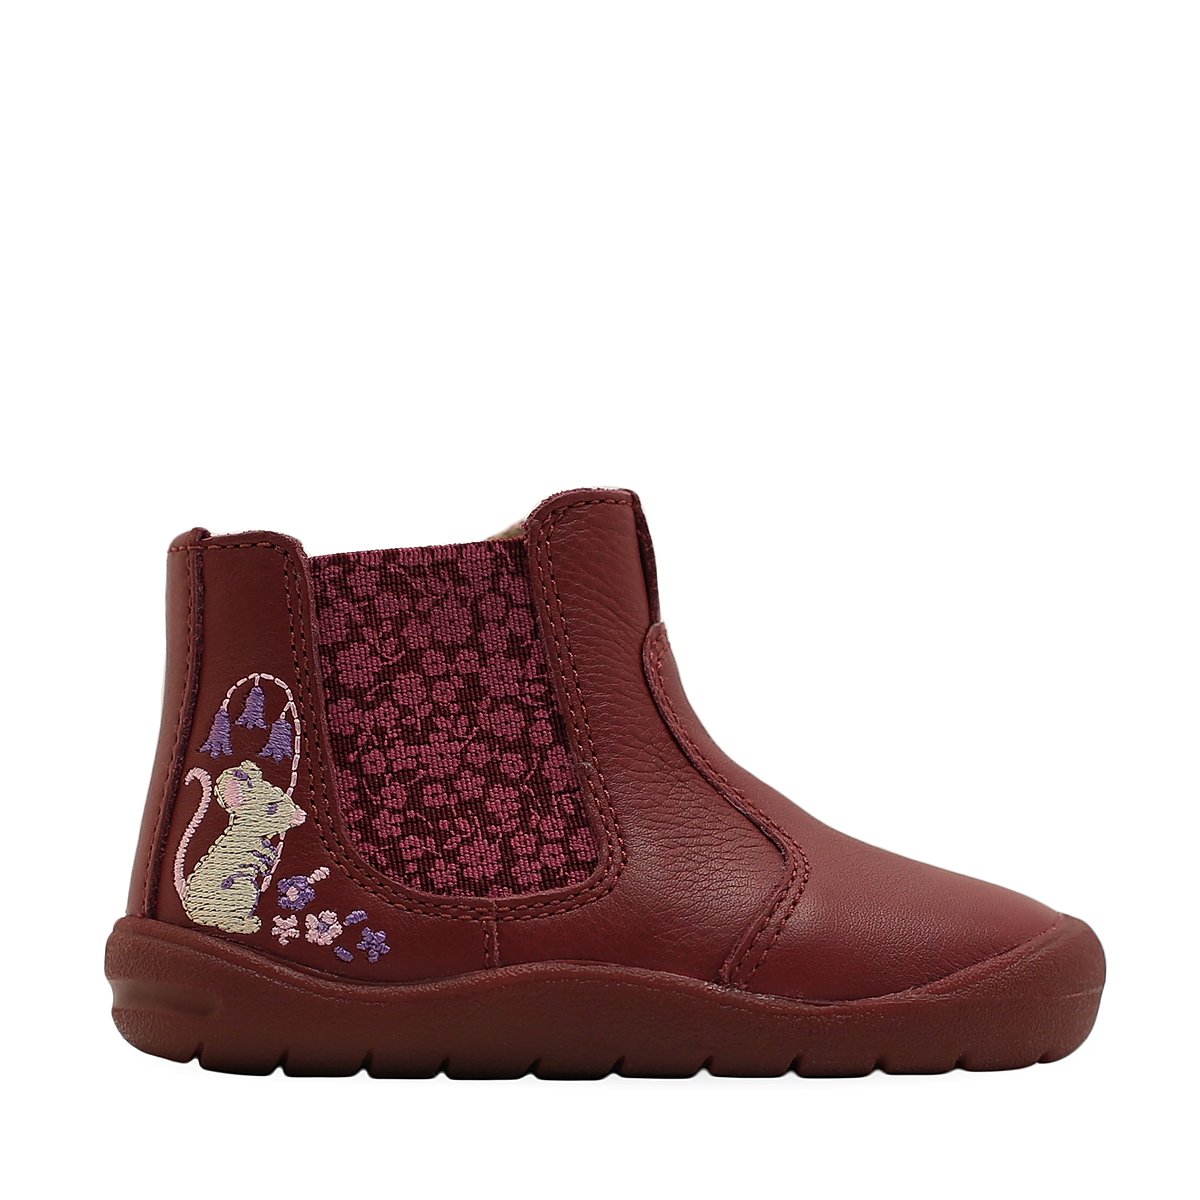 'Friend' in Wine Leather Boot with Mouse design from the exclusive Start-Rite Shoes and JoJo Maman Bébé Collection 